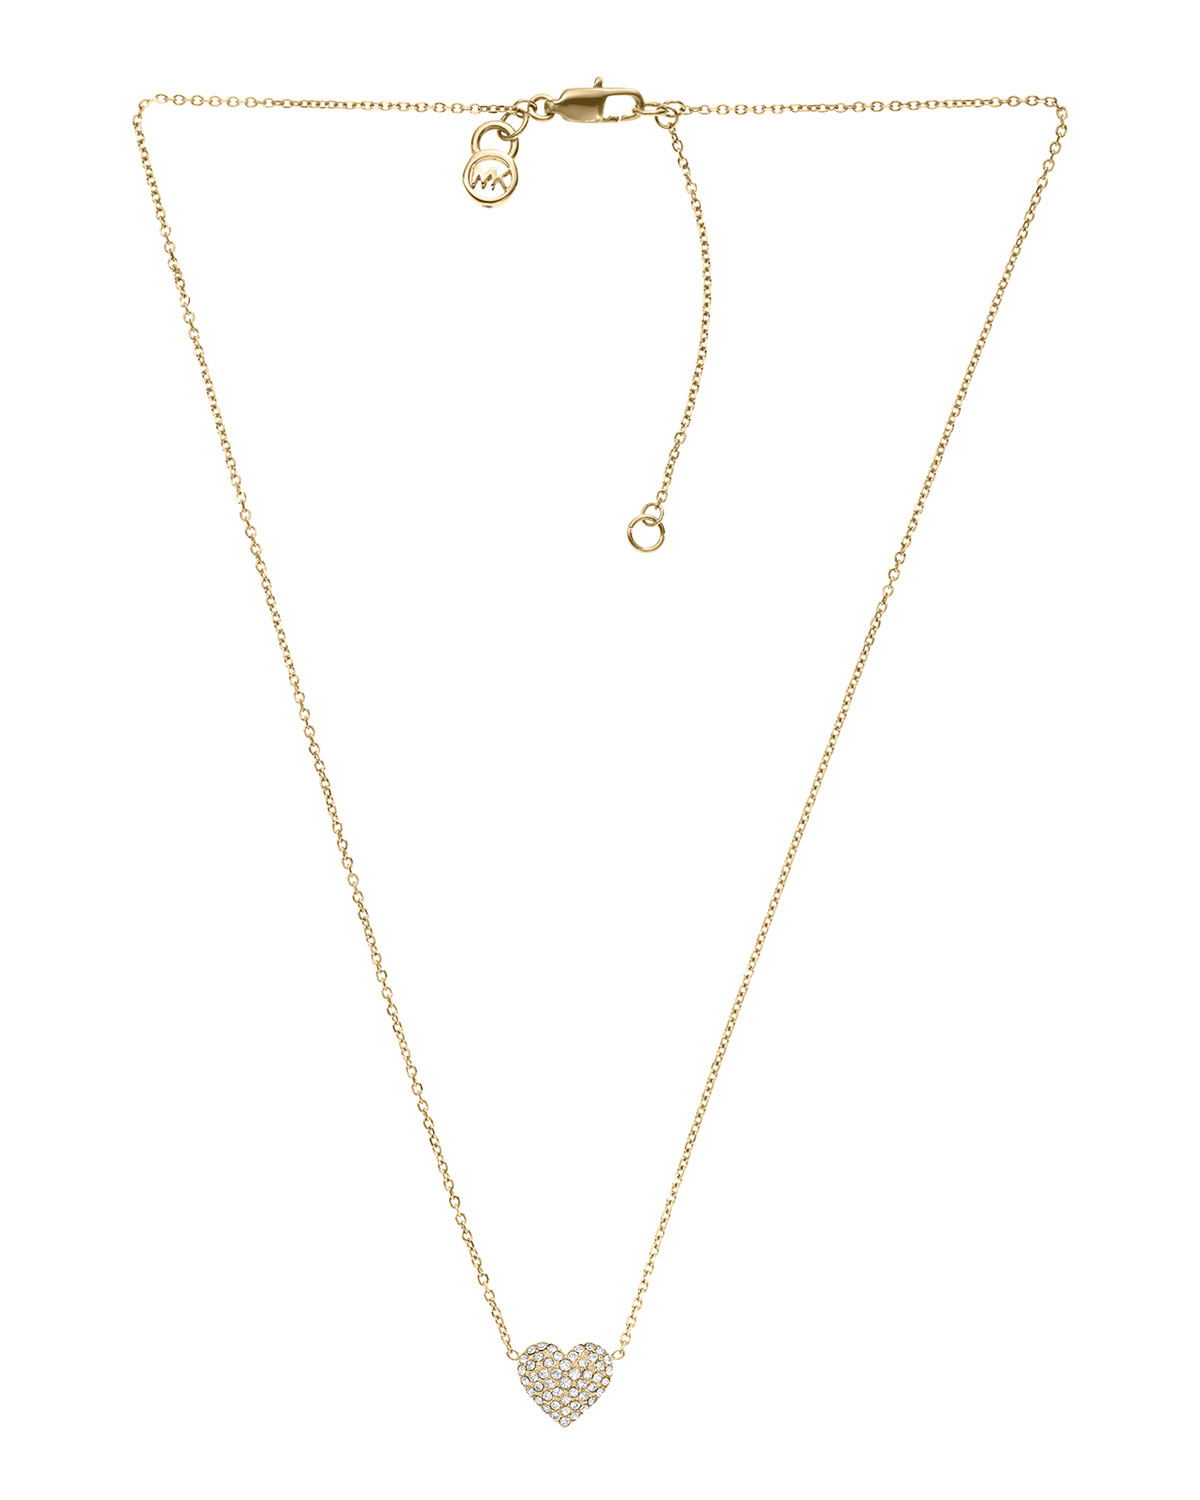 Michael Kors Pave Heart Pendant Necklace Golden in Gold